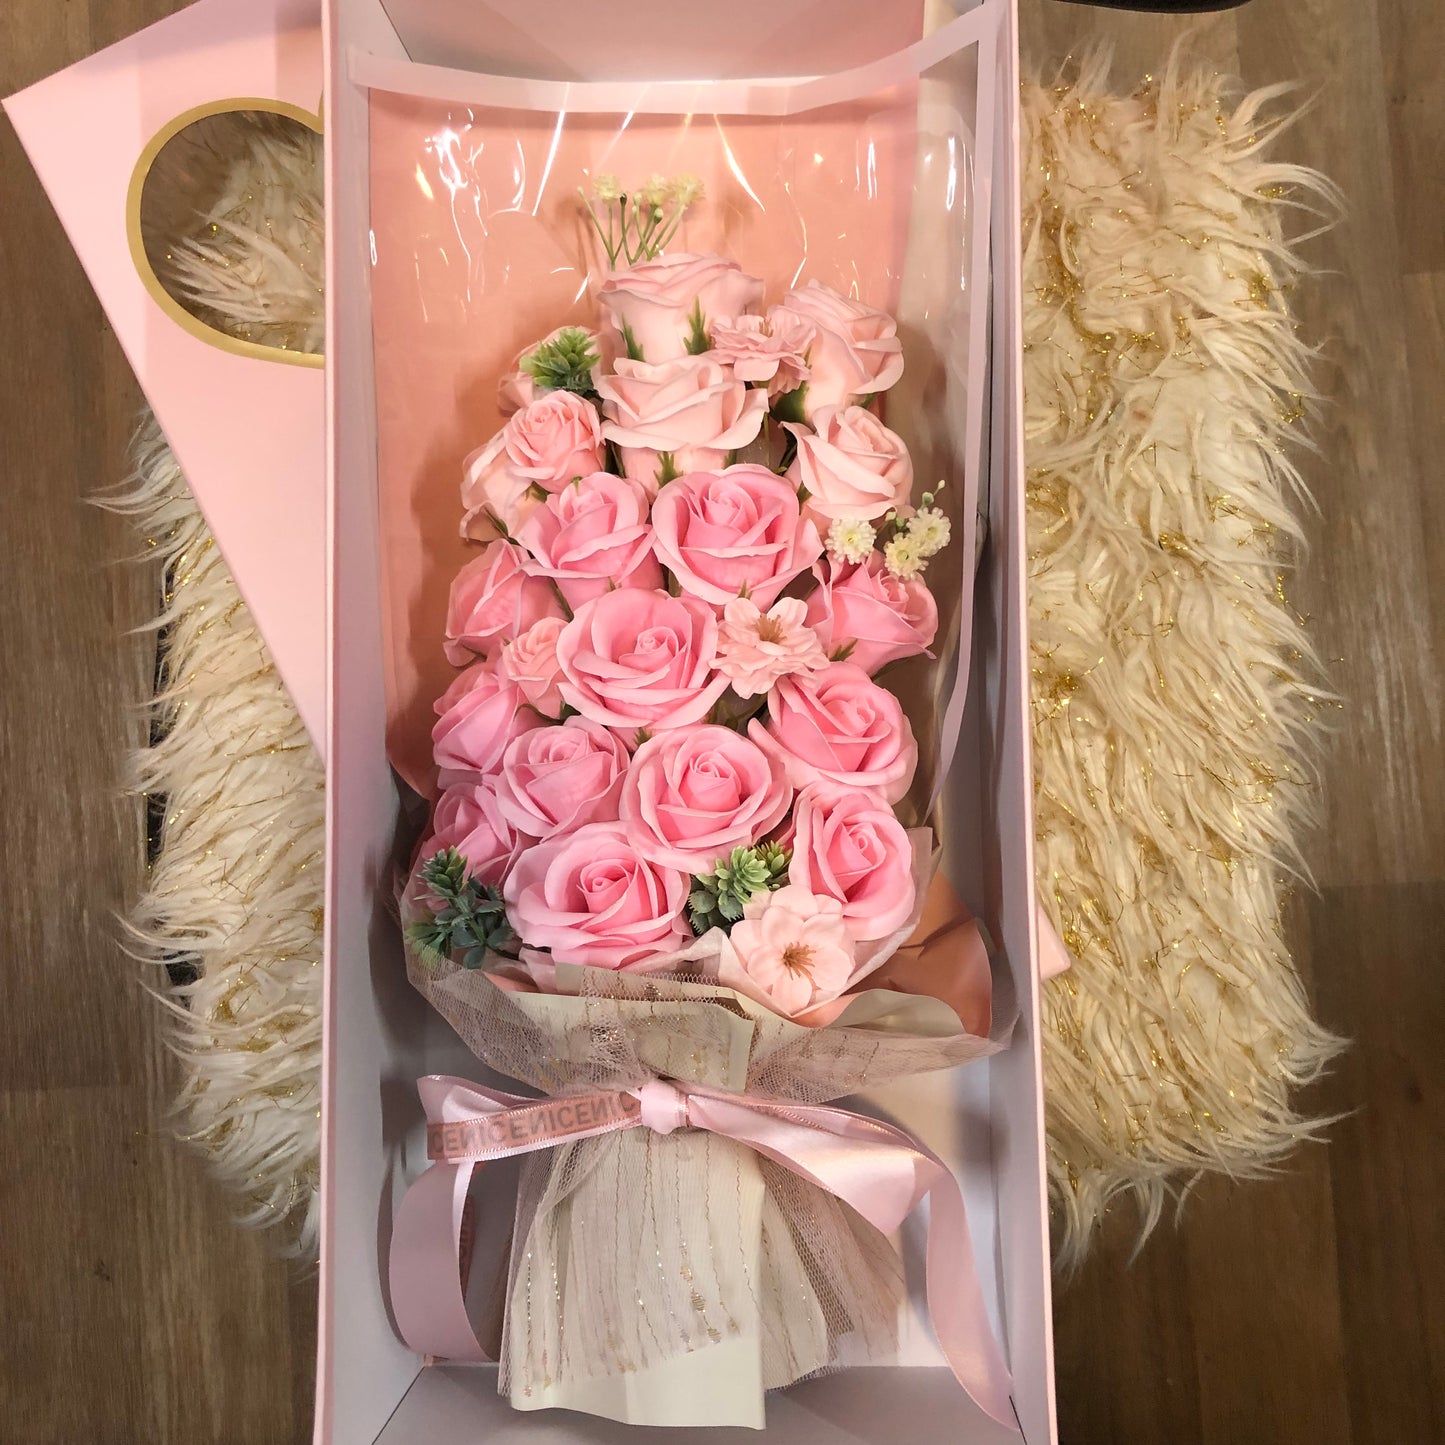 "Just In Time For Mother's Day " 3 Doz. Pink/Peach Silk Scented Roses "New Arrival Going Fast